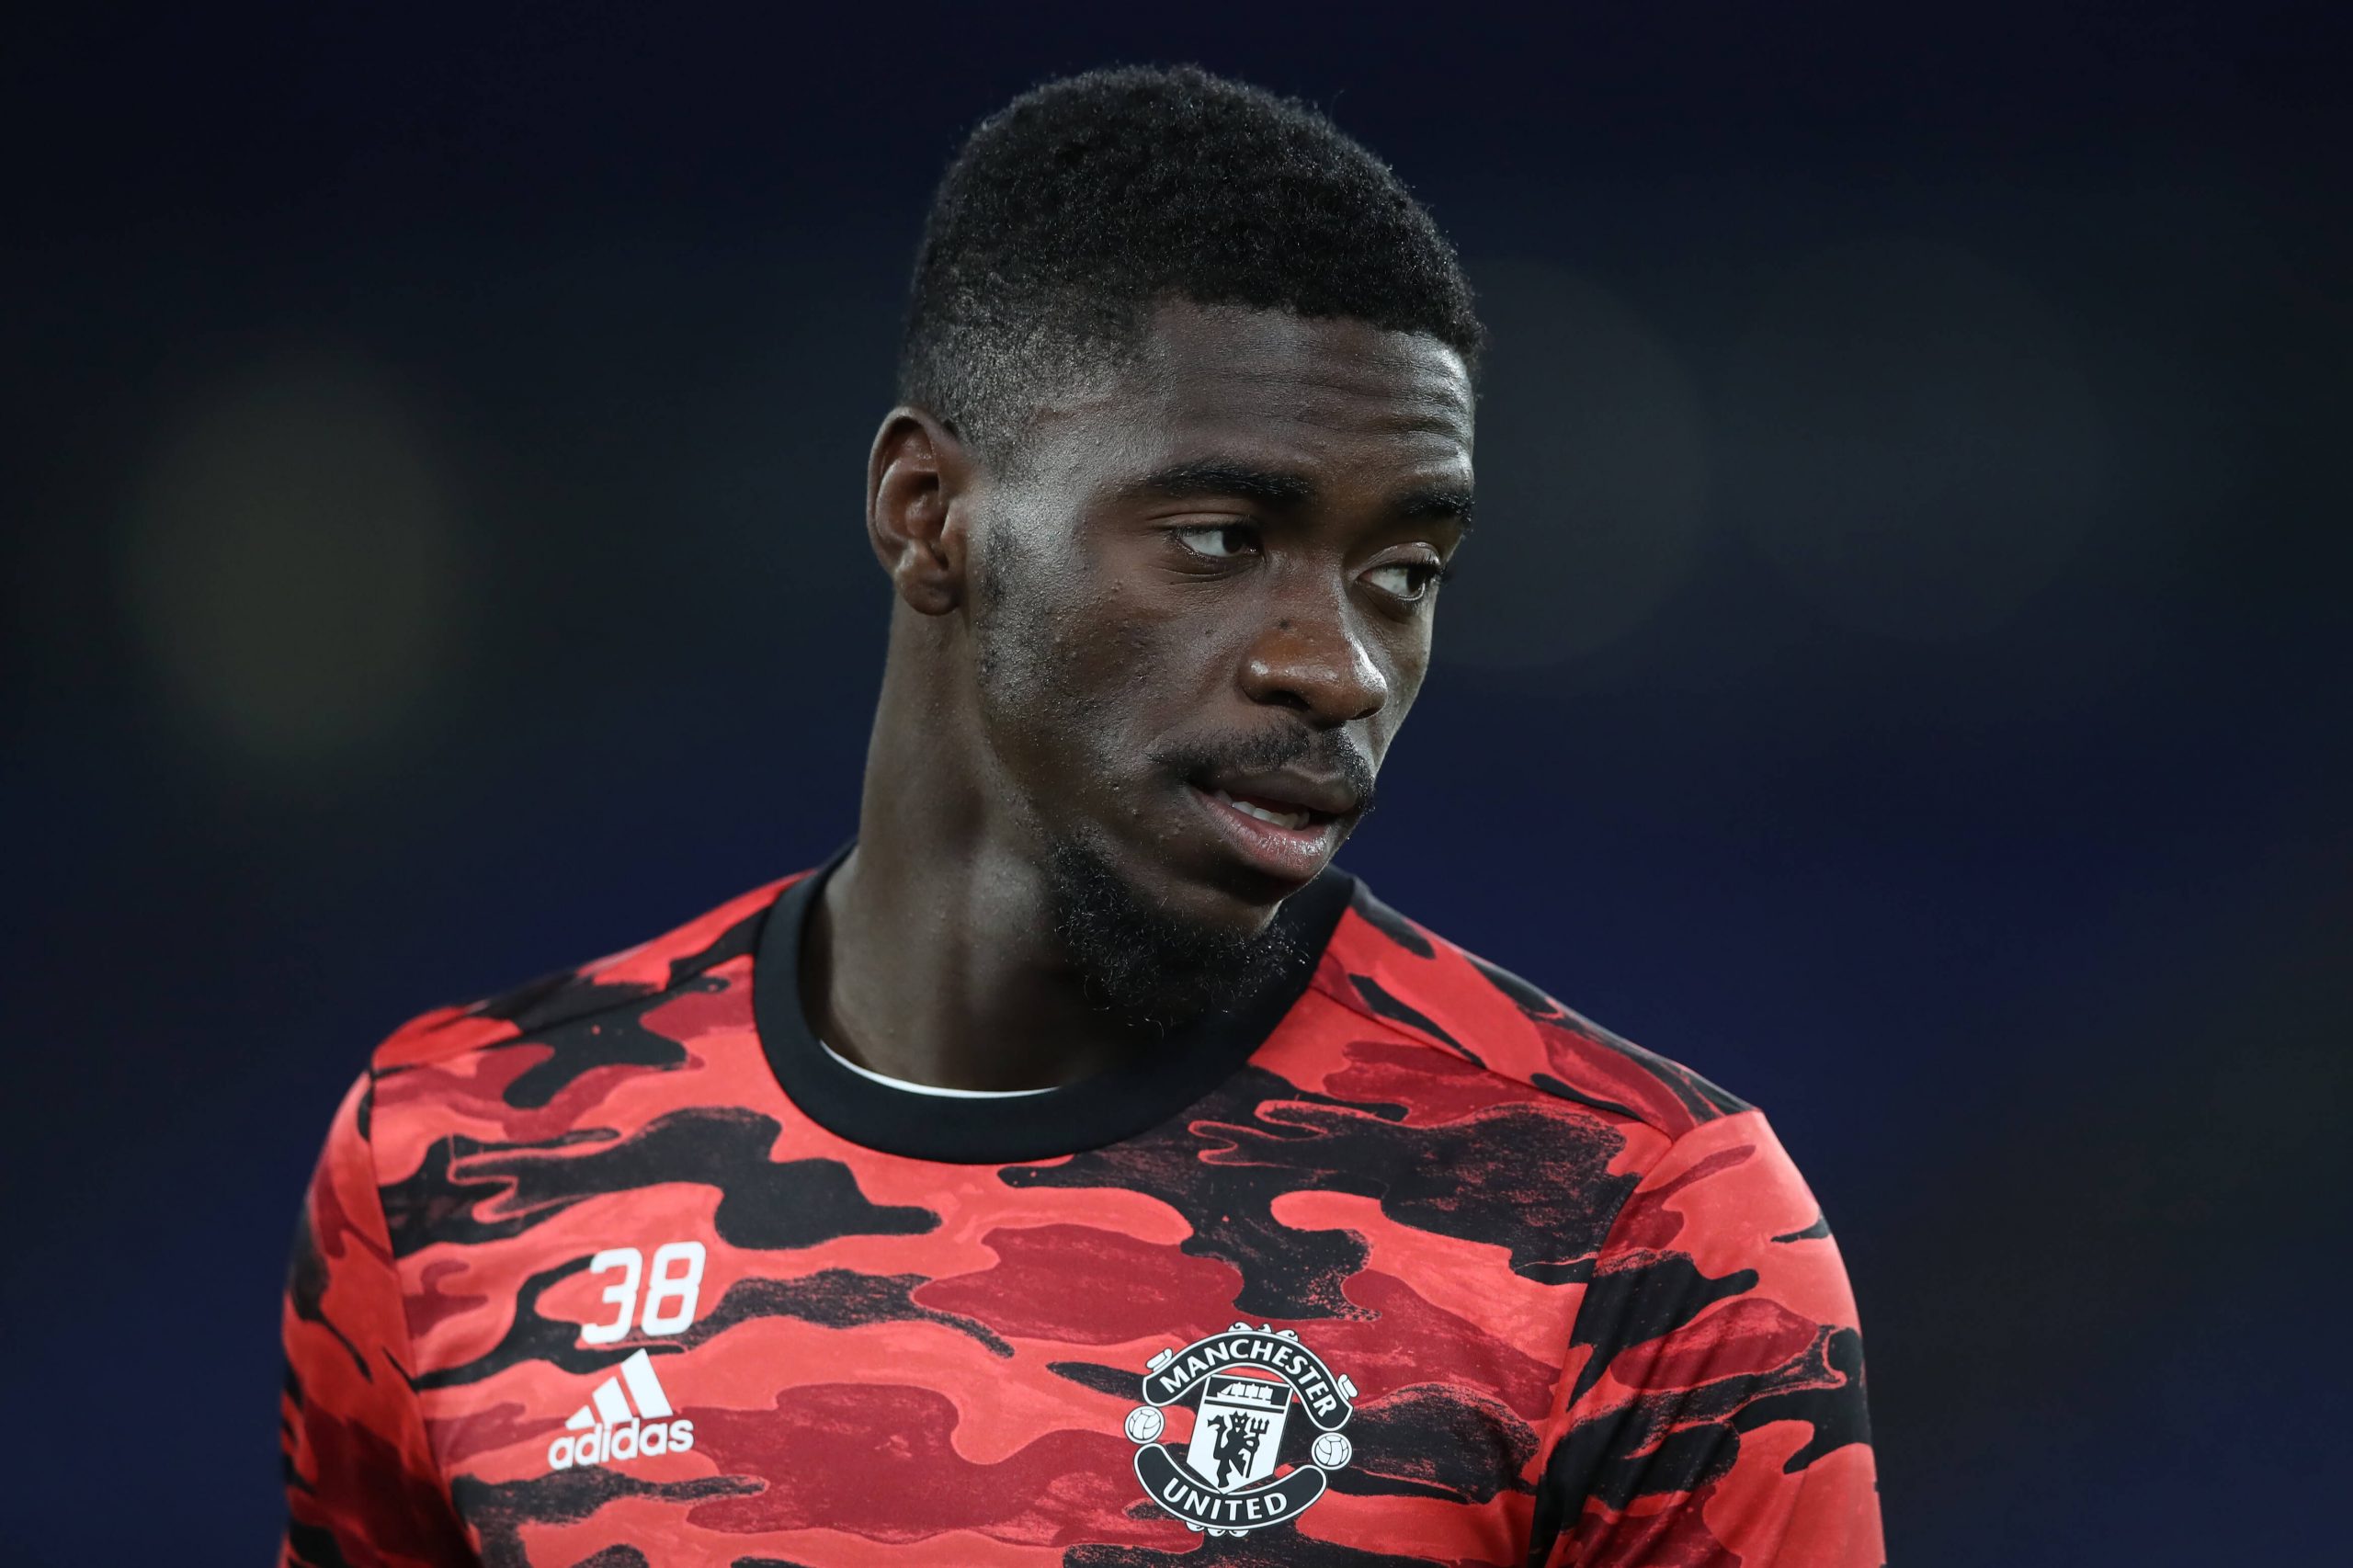 Axel Tuanzebe in action for Manchester United.